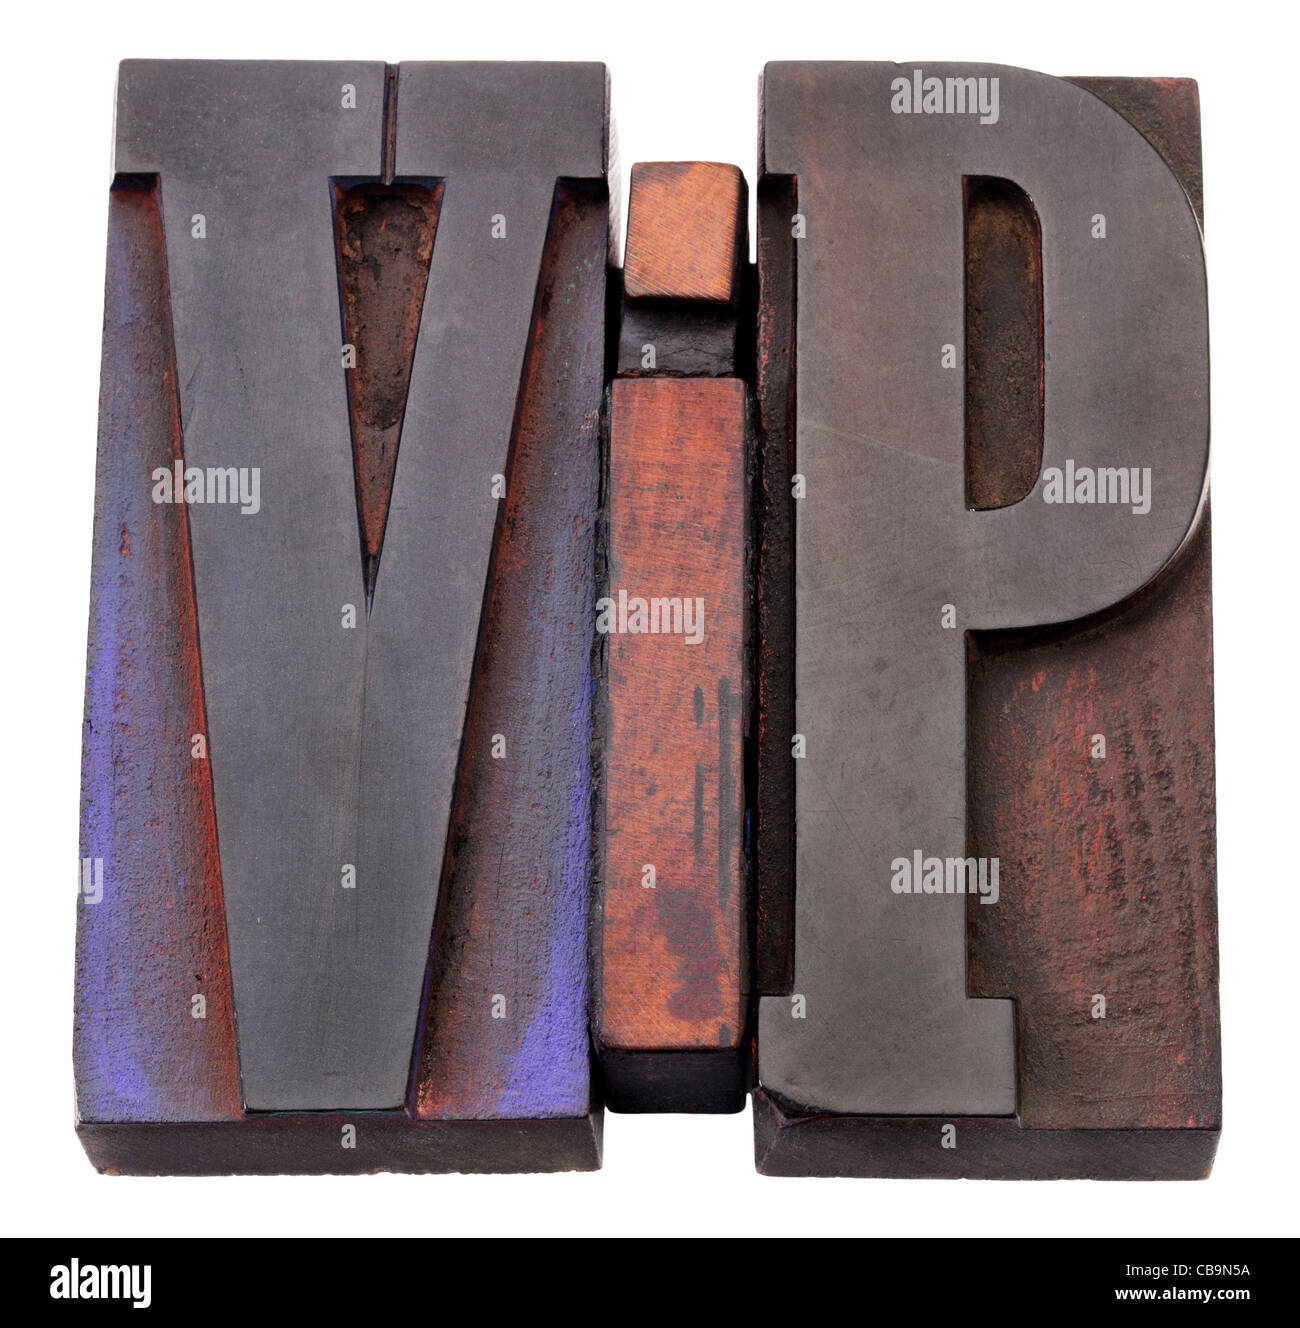 VIP (very important person) acronym - isolated vintage wood letterpess printing blocks stained by color inks Stock Photo